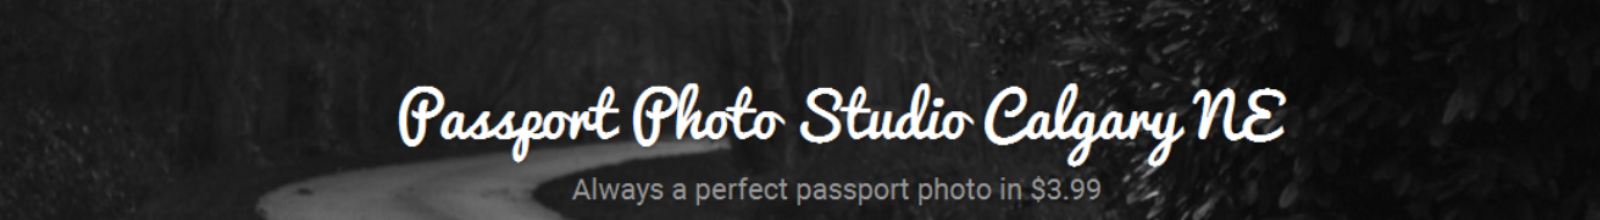 Canadian Id Passport photos instant within 5 minutes or less 100% accepted